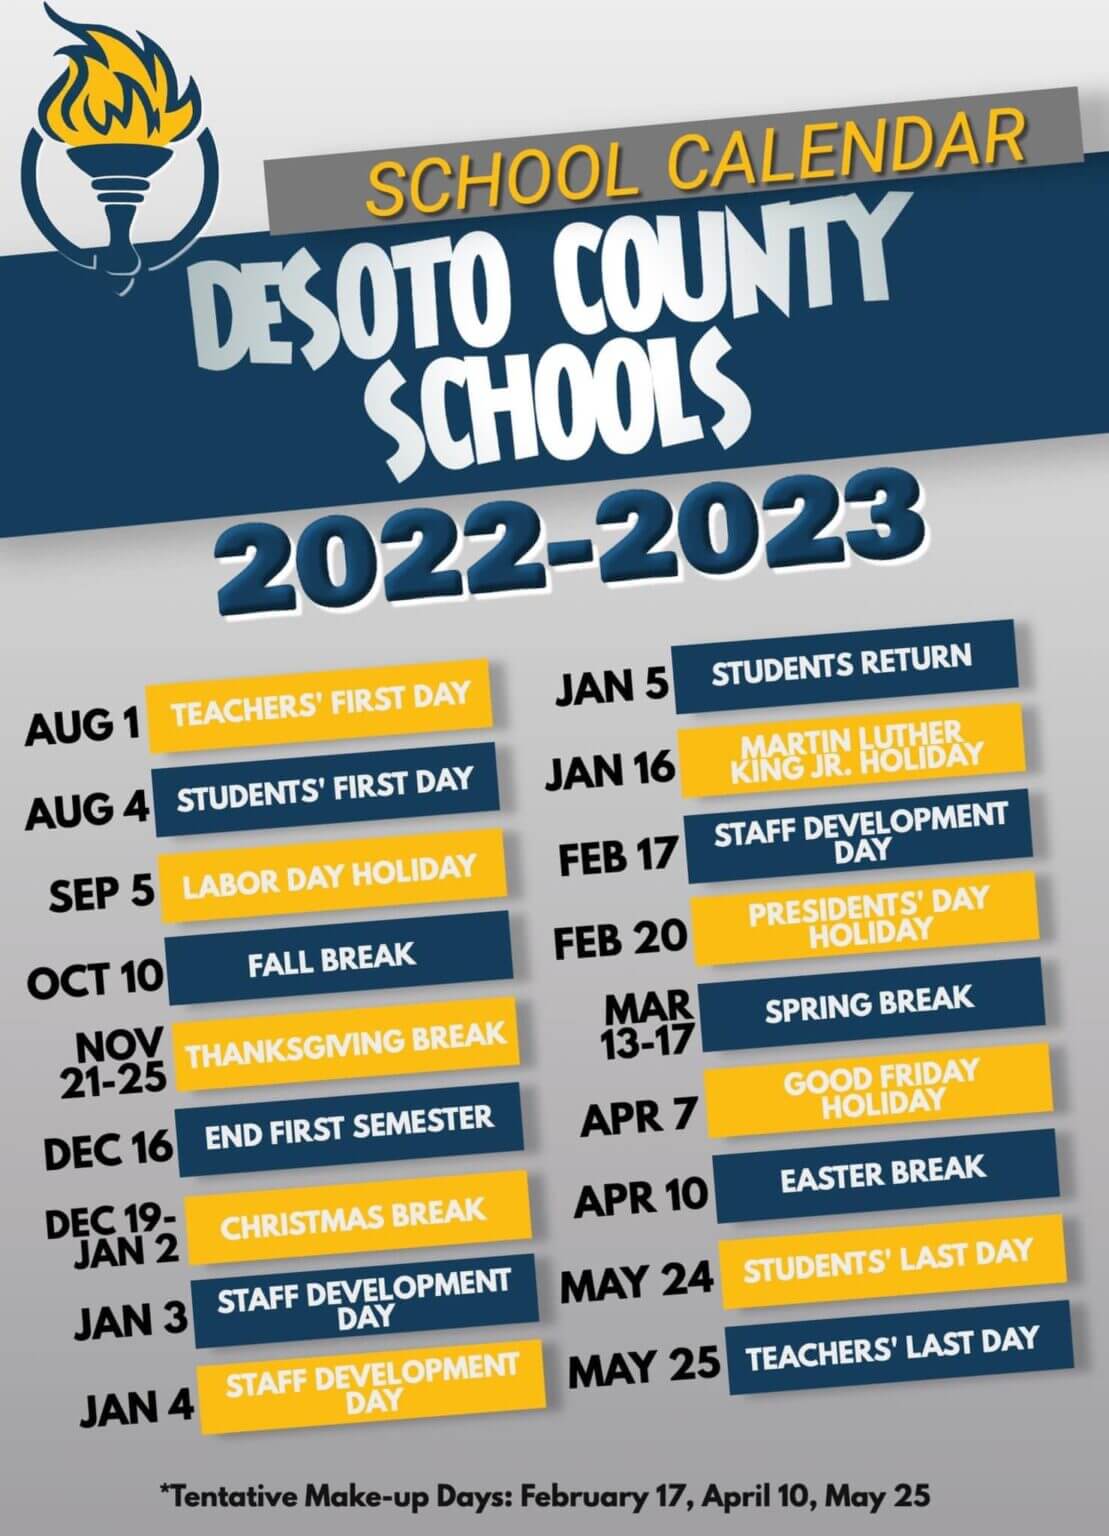 School calendar approved for 2022-23 | DeSoto County News